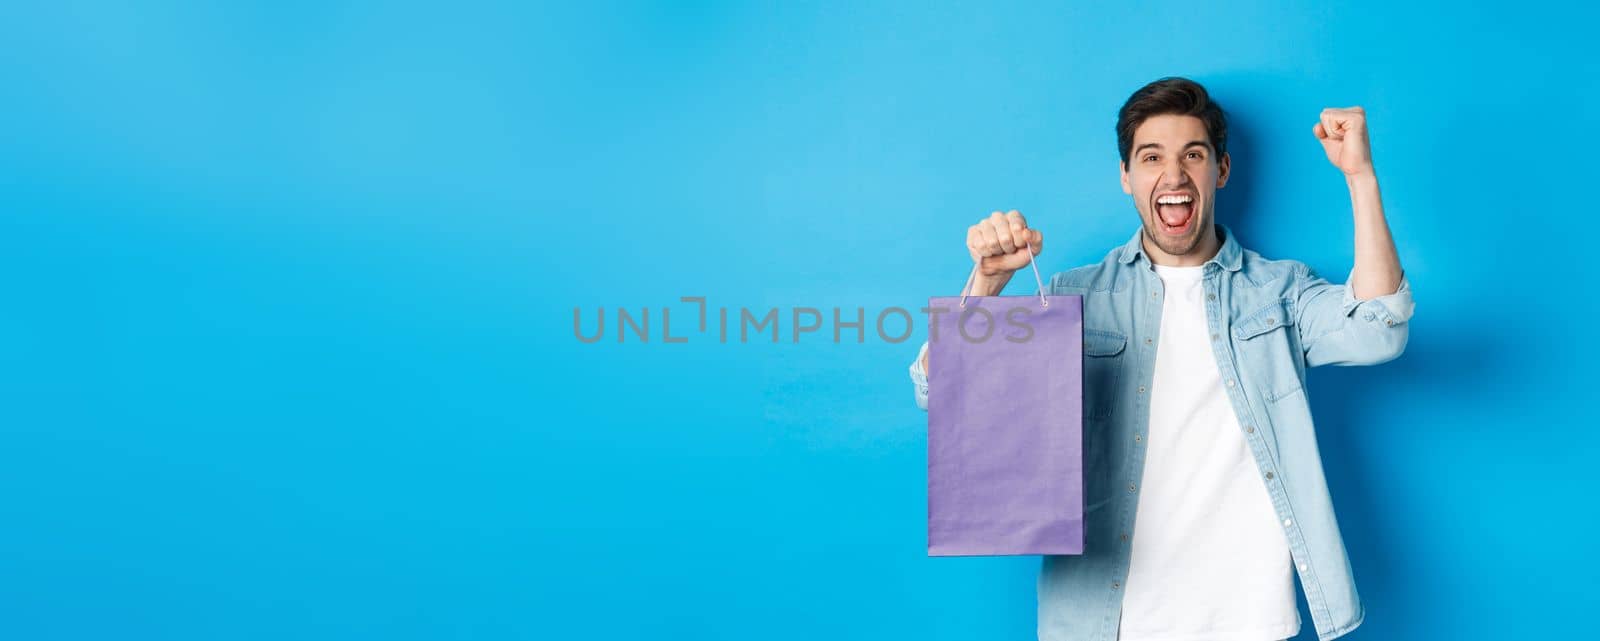 Concept of shopping, holidays and lifestyle. Cheerful young man celebrating, holding paper bag and making fist pump like winner, standing over blue background.